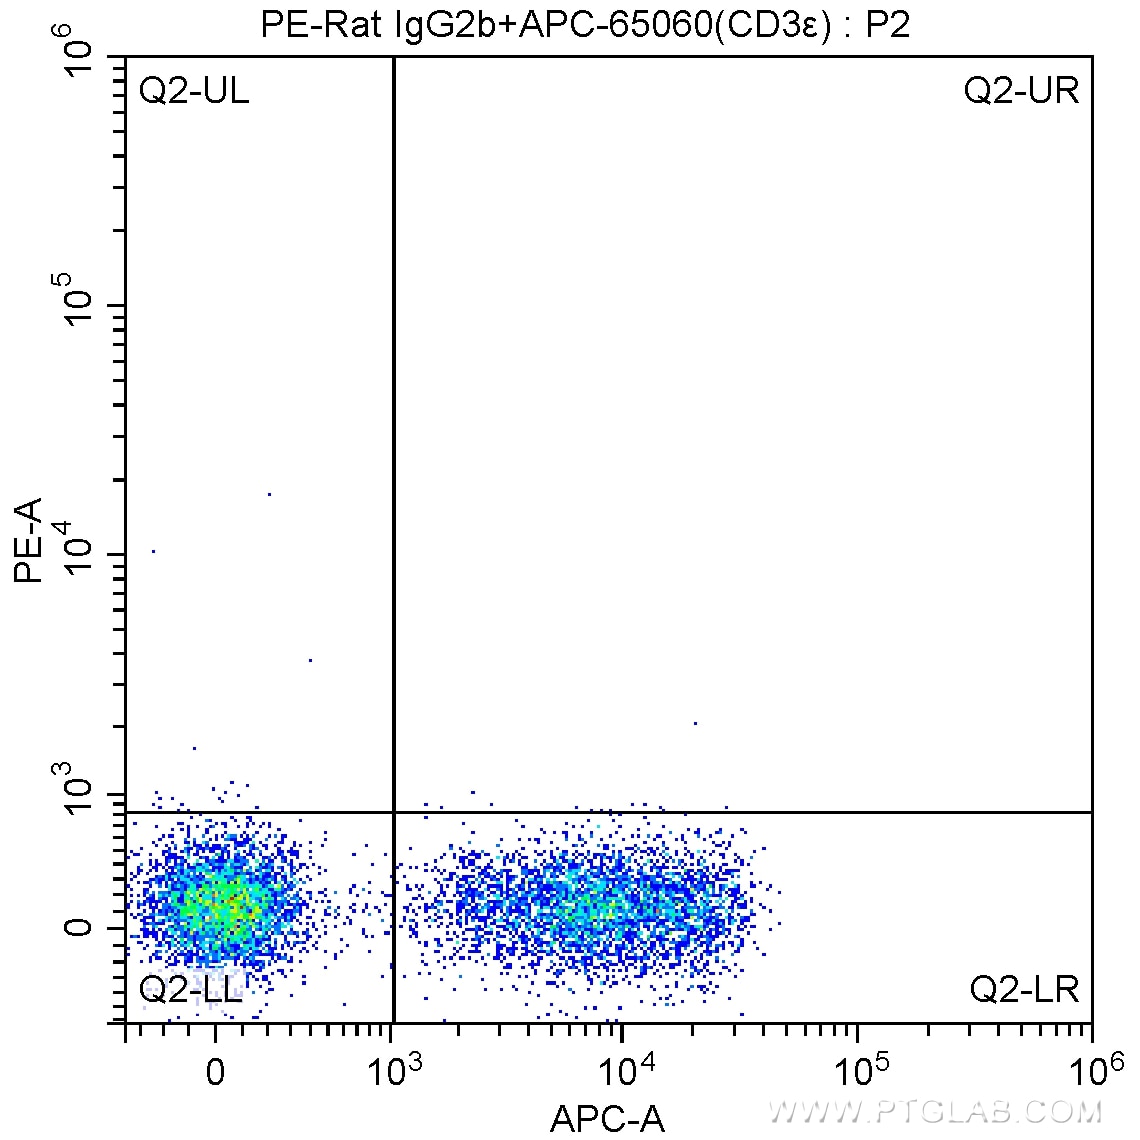 Flow cytometry (FC) experiment of mouse splenocytes using PE Anti-Mouse CD16 / CD32 (2.4G2) (PE-65080)